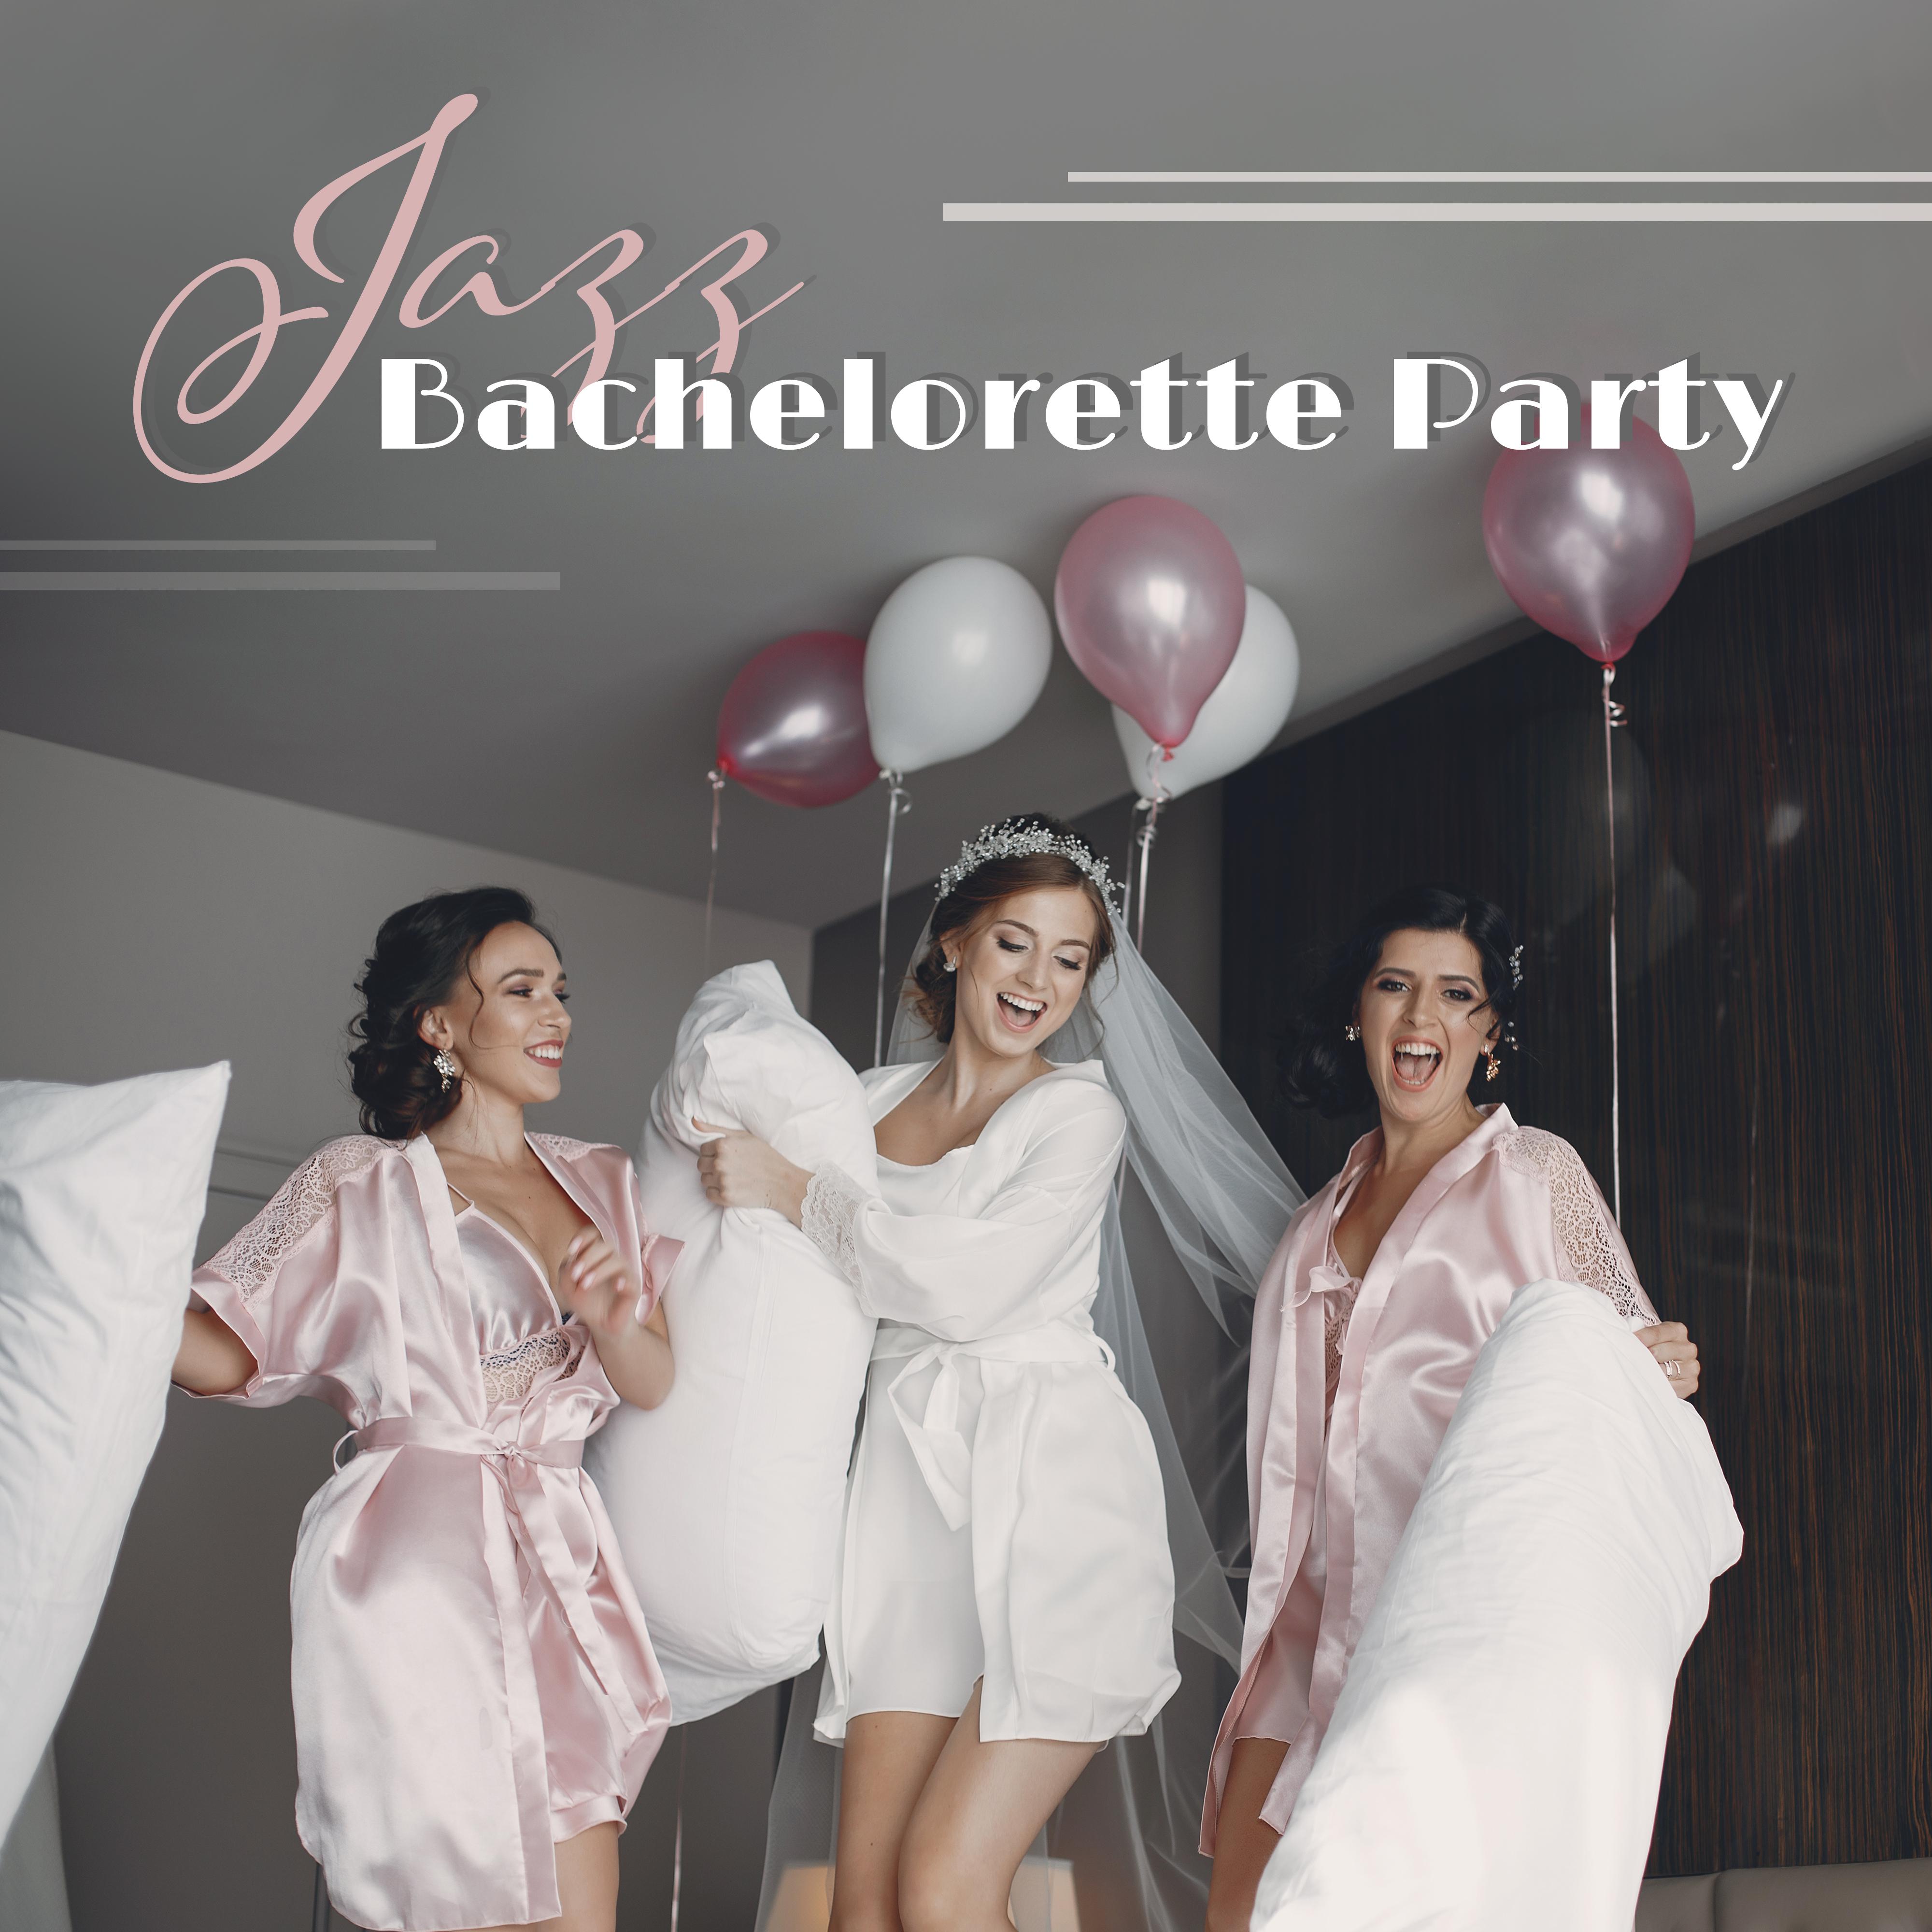 Jazz Bachelorette Party - Stylish Background Music for a Party Evening in the Garden or Home